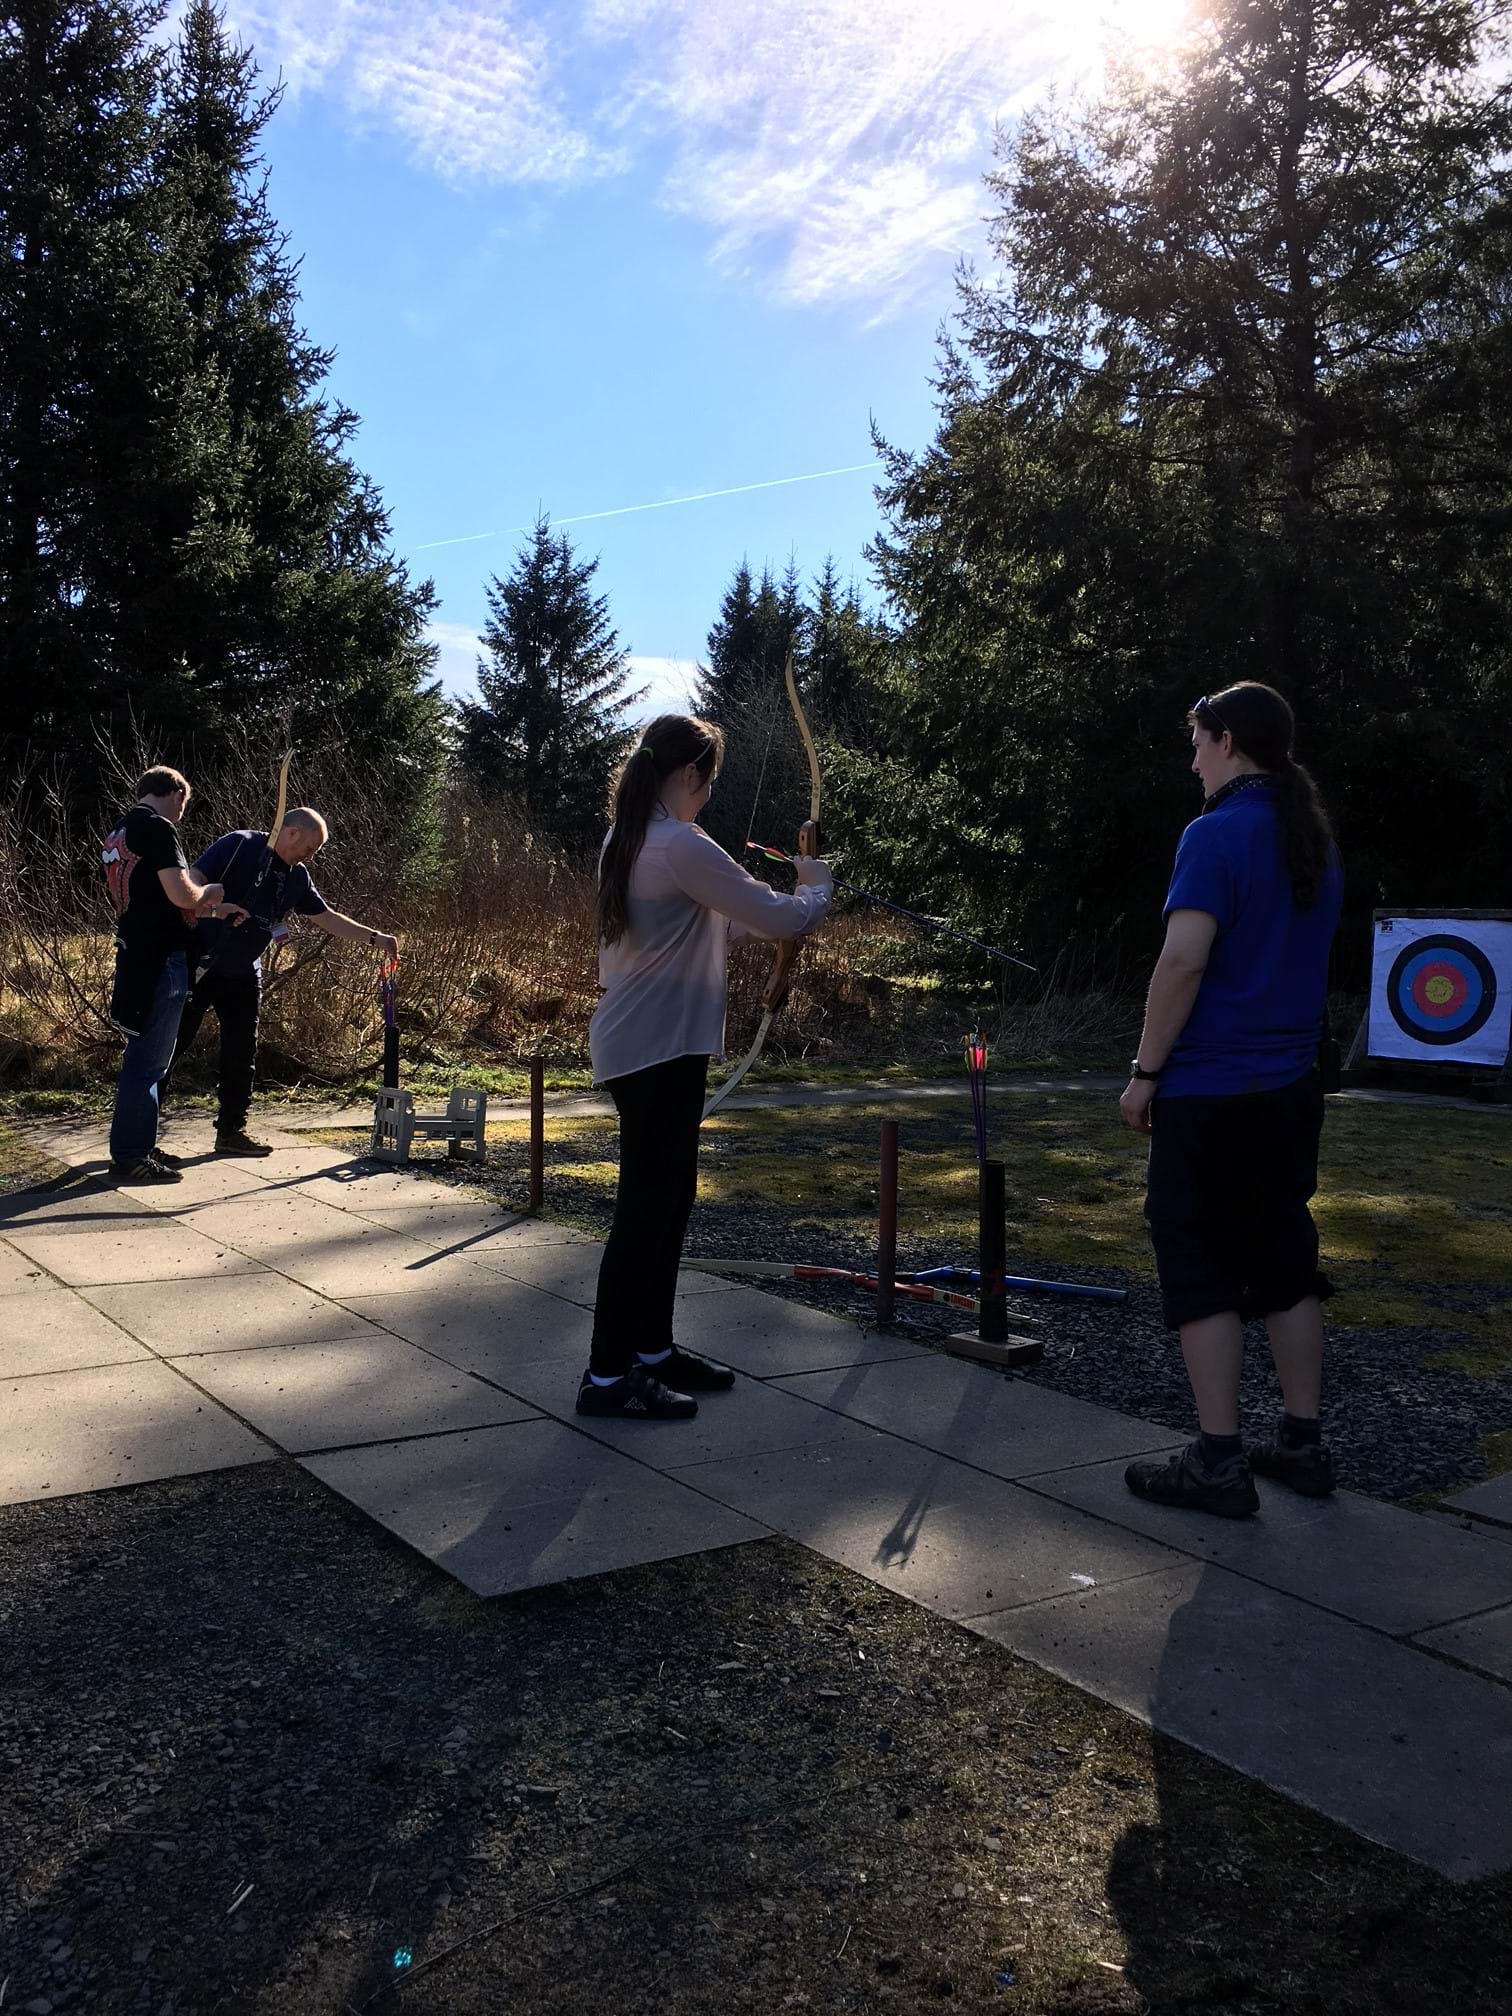 Archery at Headway's ‘Look Ahead in the North’ weekend